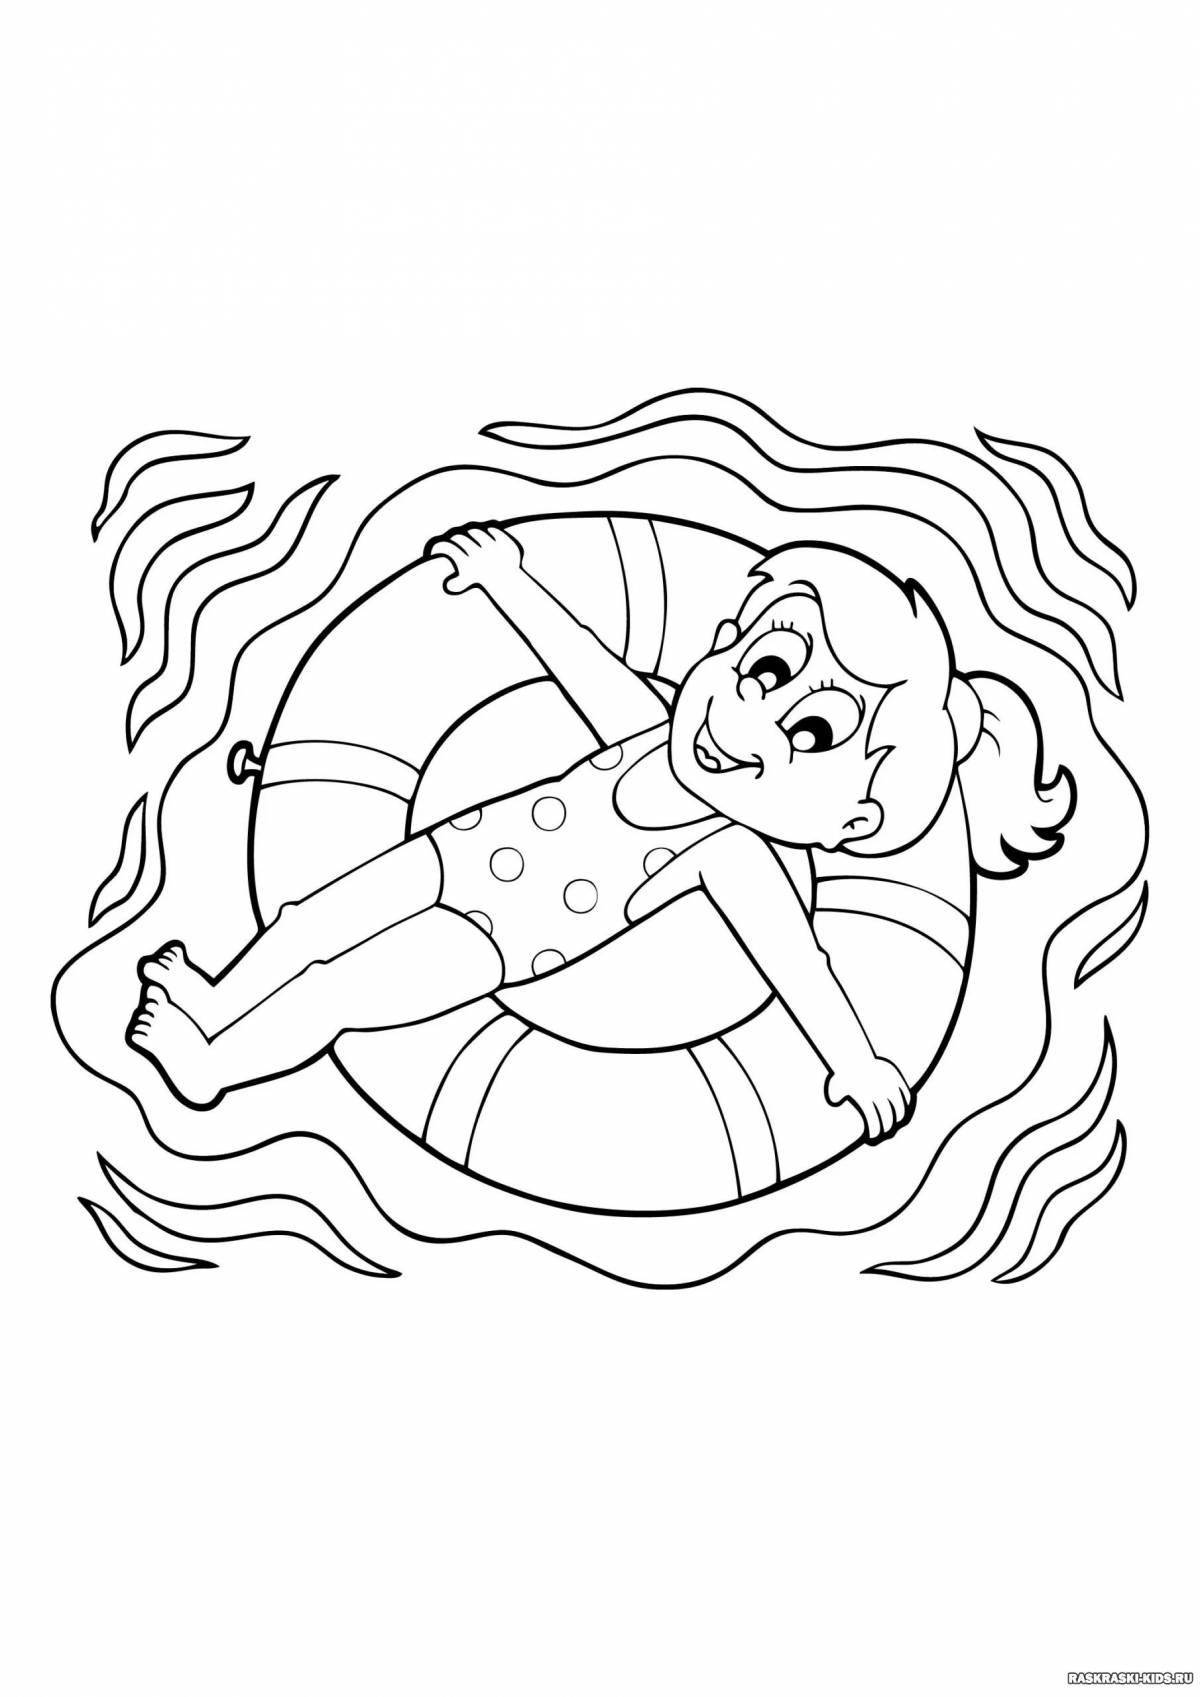 Water safety colorful coloring page